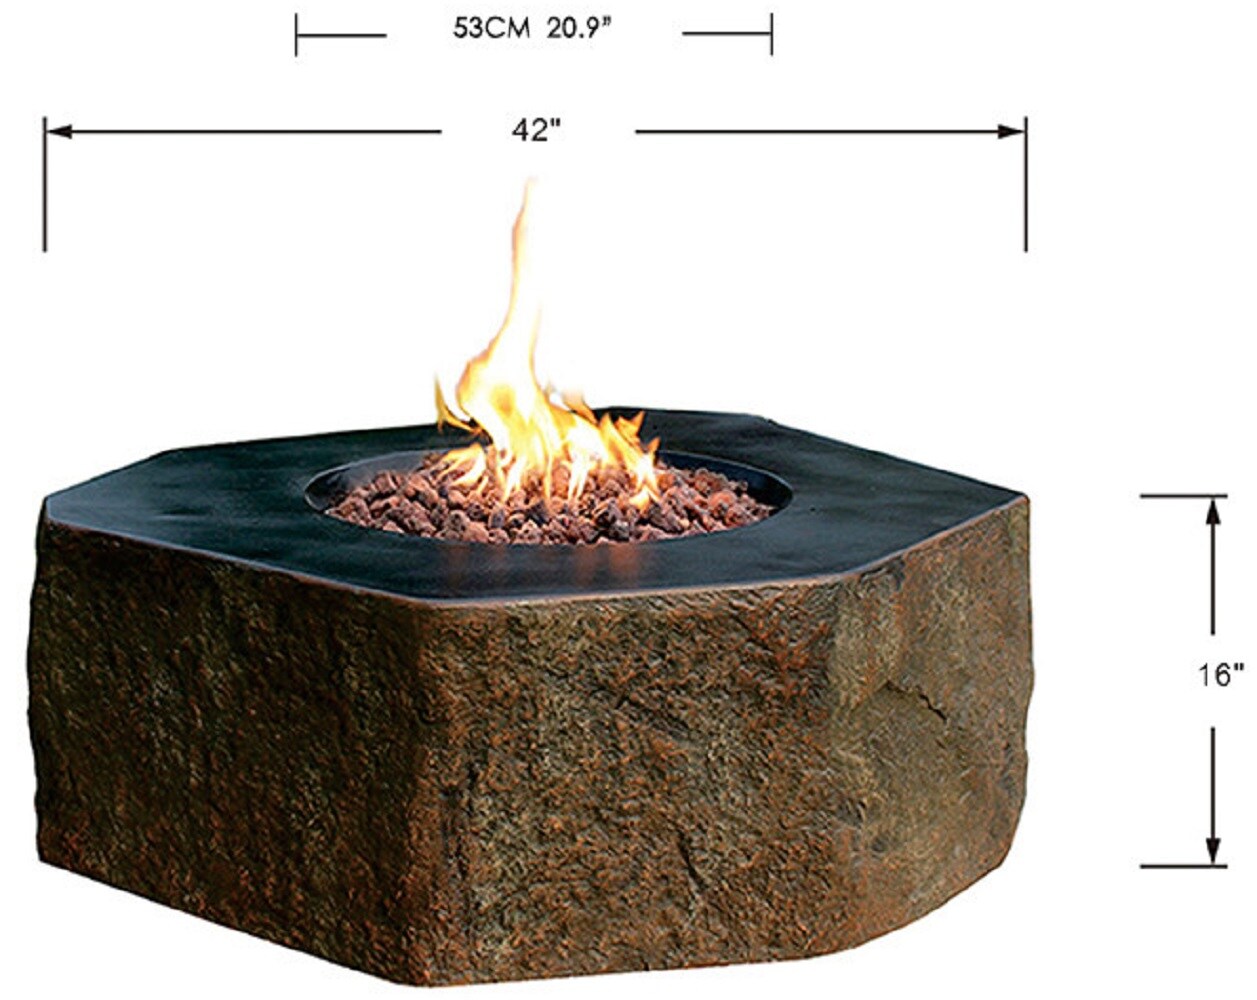 45,000 BTU Auto-Ignition Outdoor Fire Pit Fire Table/Patio Furniture Canvas Cover & Lava Rock Included Elementi Columbia Cast Concrete Natural Gas Fire Table Stainless Steel Burner 